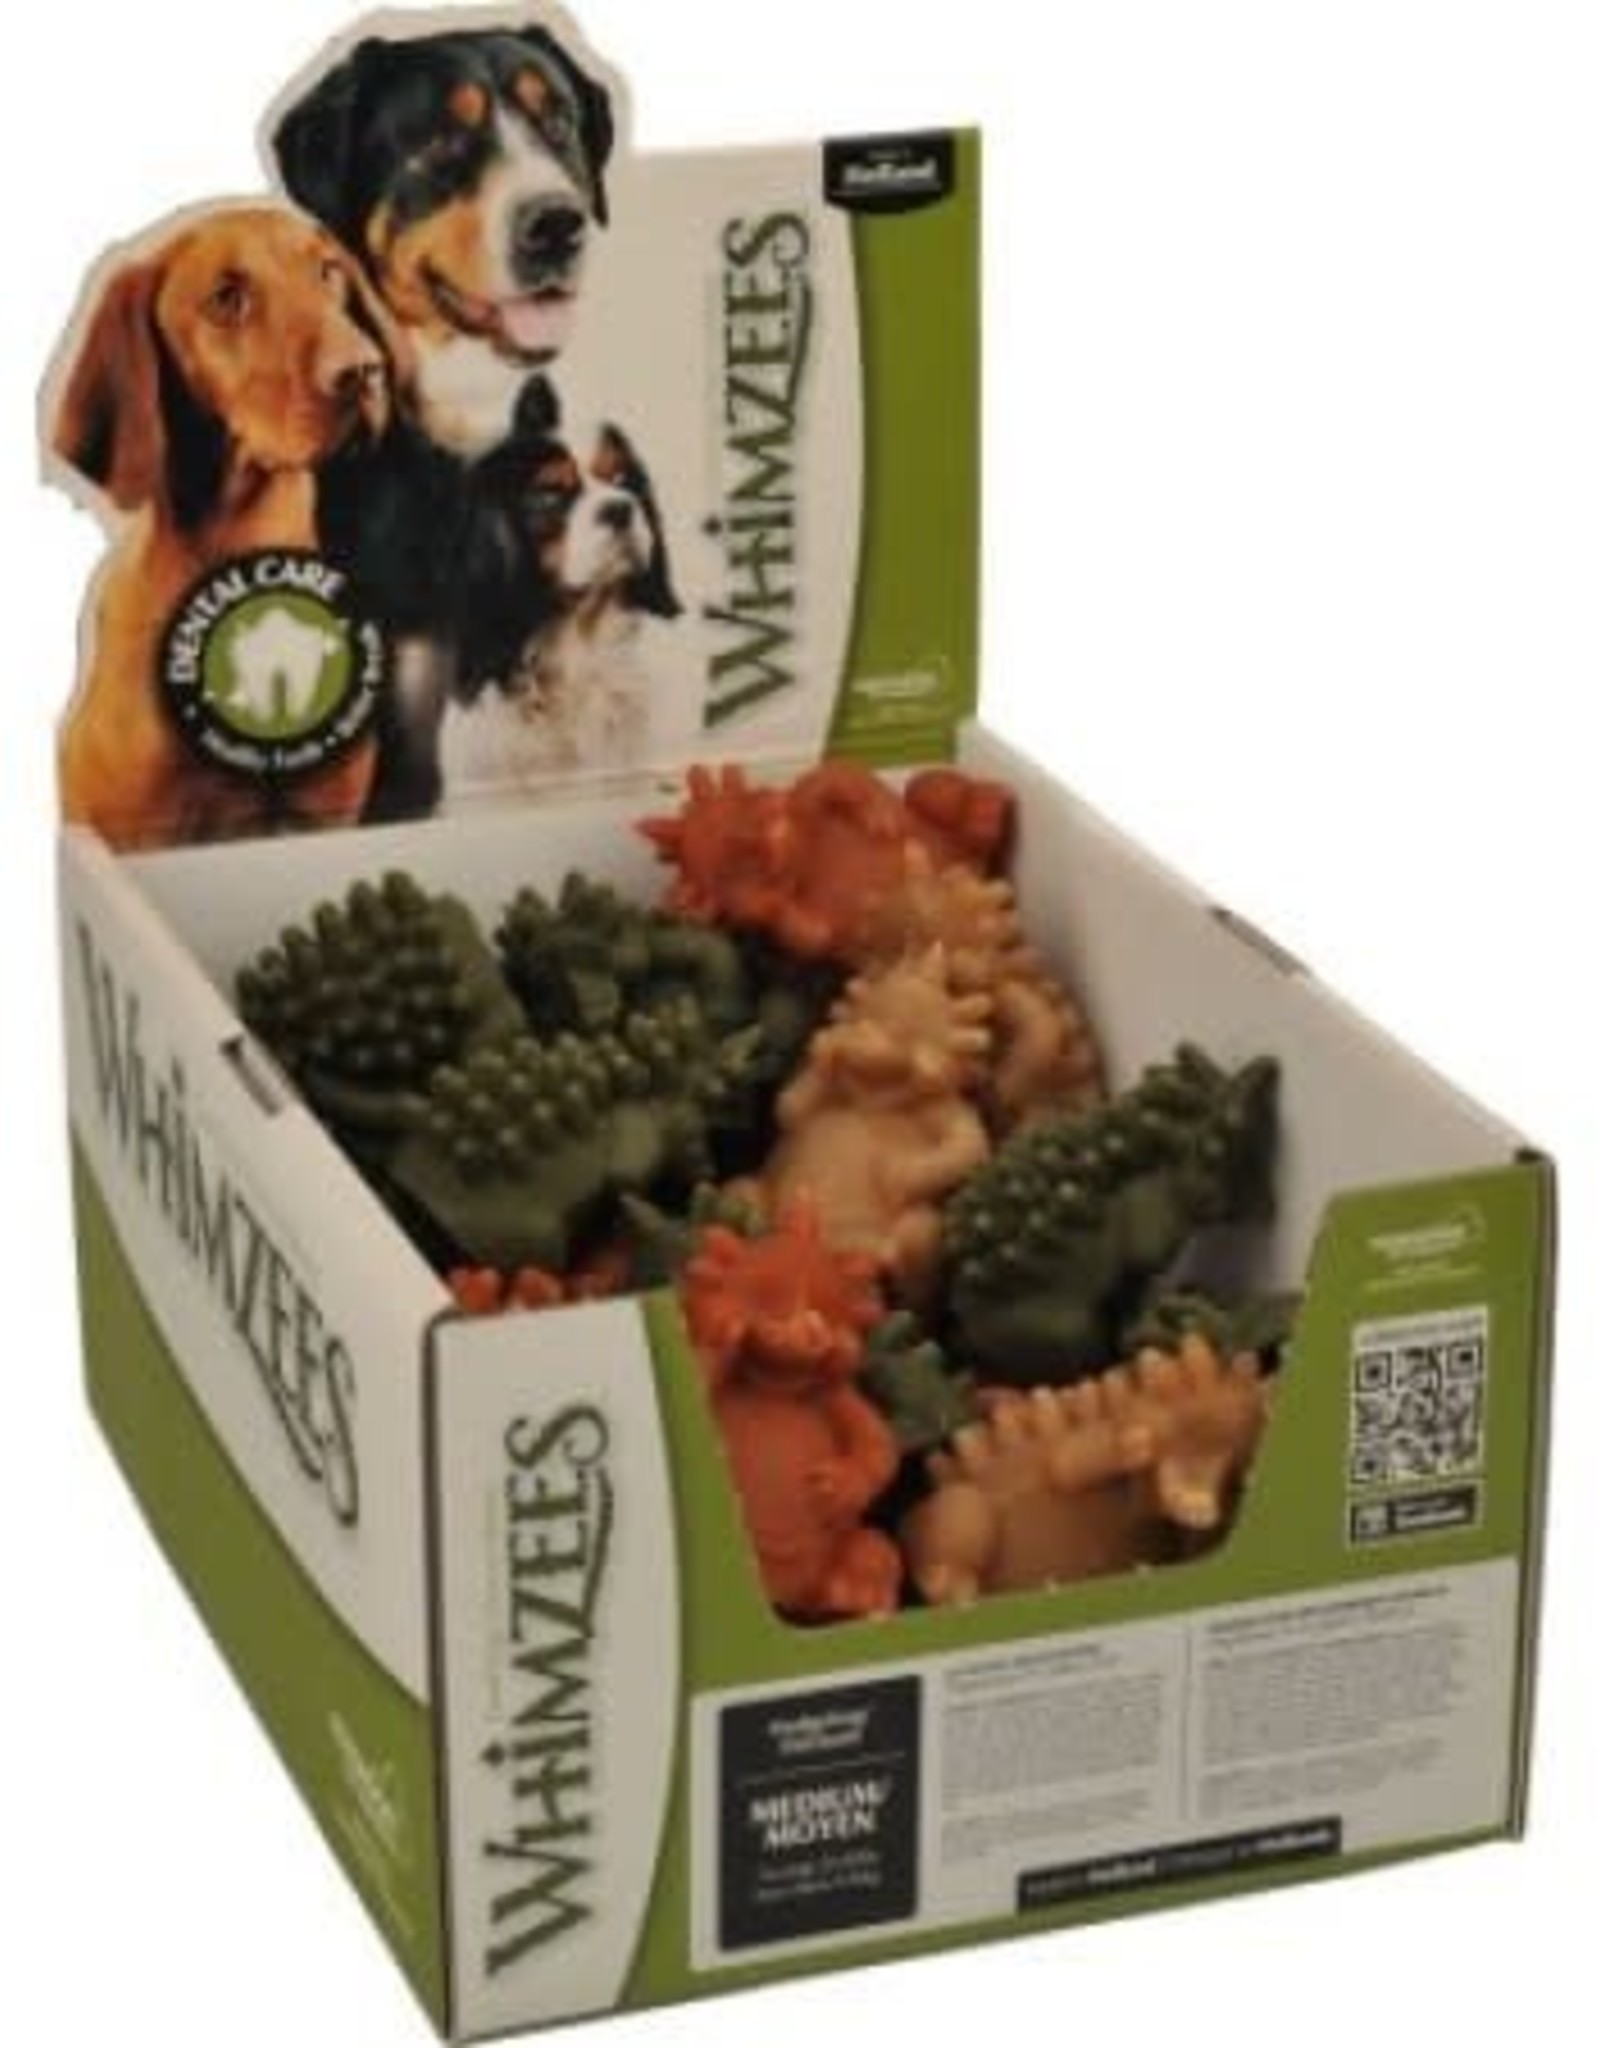 PARAGON PET PRODUCTS USA WHIMZEES Large Hedgehog Bulk, Each Price